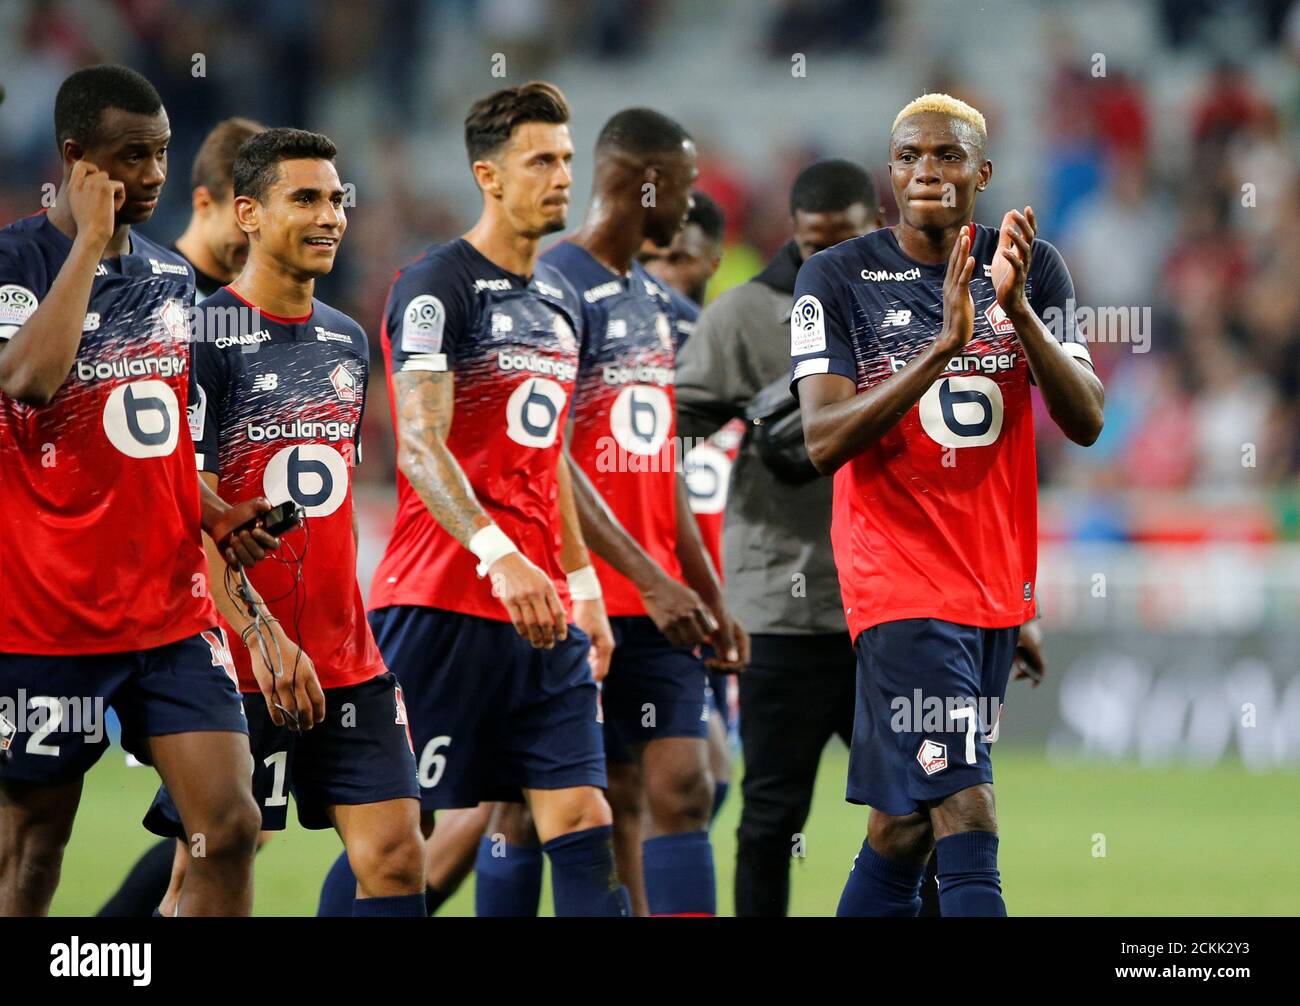 Soccer Football Ligue 1 Lille Vs As Saint Etienne Stade Pierre Mauroy Lille France August 28 2019 Lille S Victor Osimhen Applauds Fans After The Match Reuters Pascal Rossignol Stock Photo Alamy